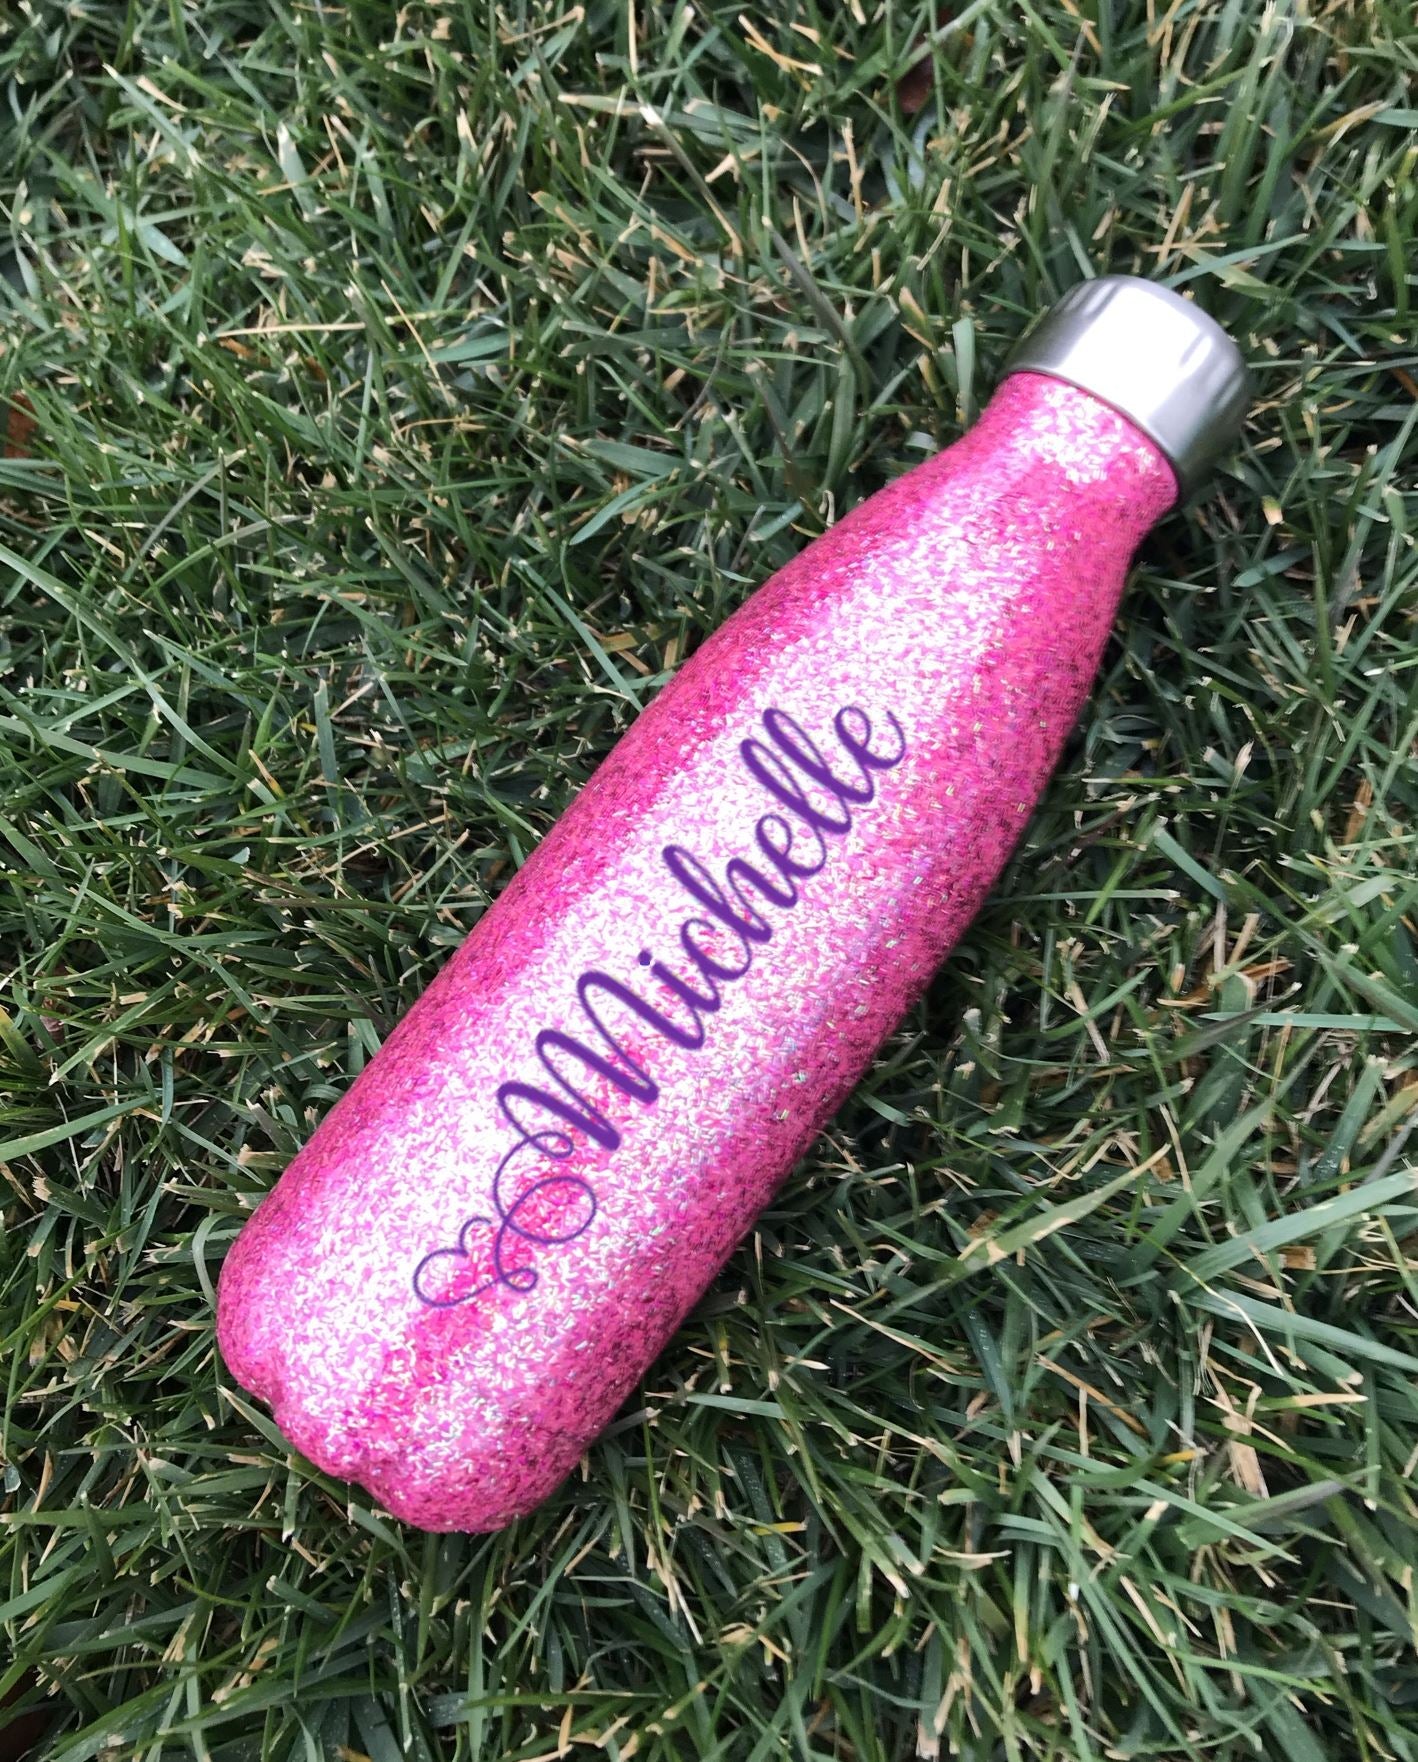 Stainless Steel Water Bottle Water Bottle B1ack By Design LLC Holographic Pink Glitter Name 